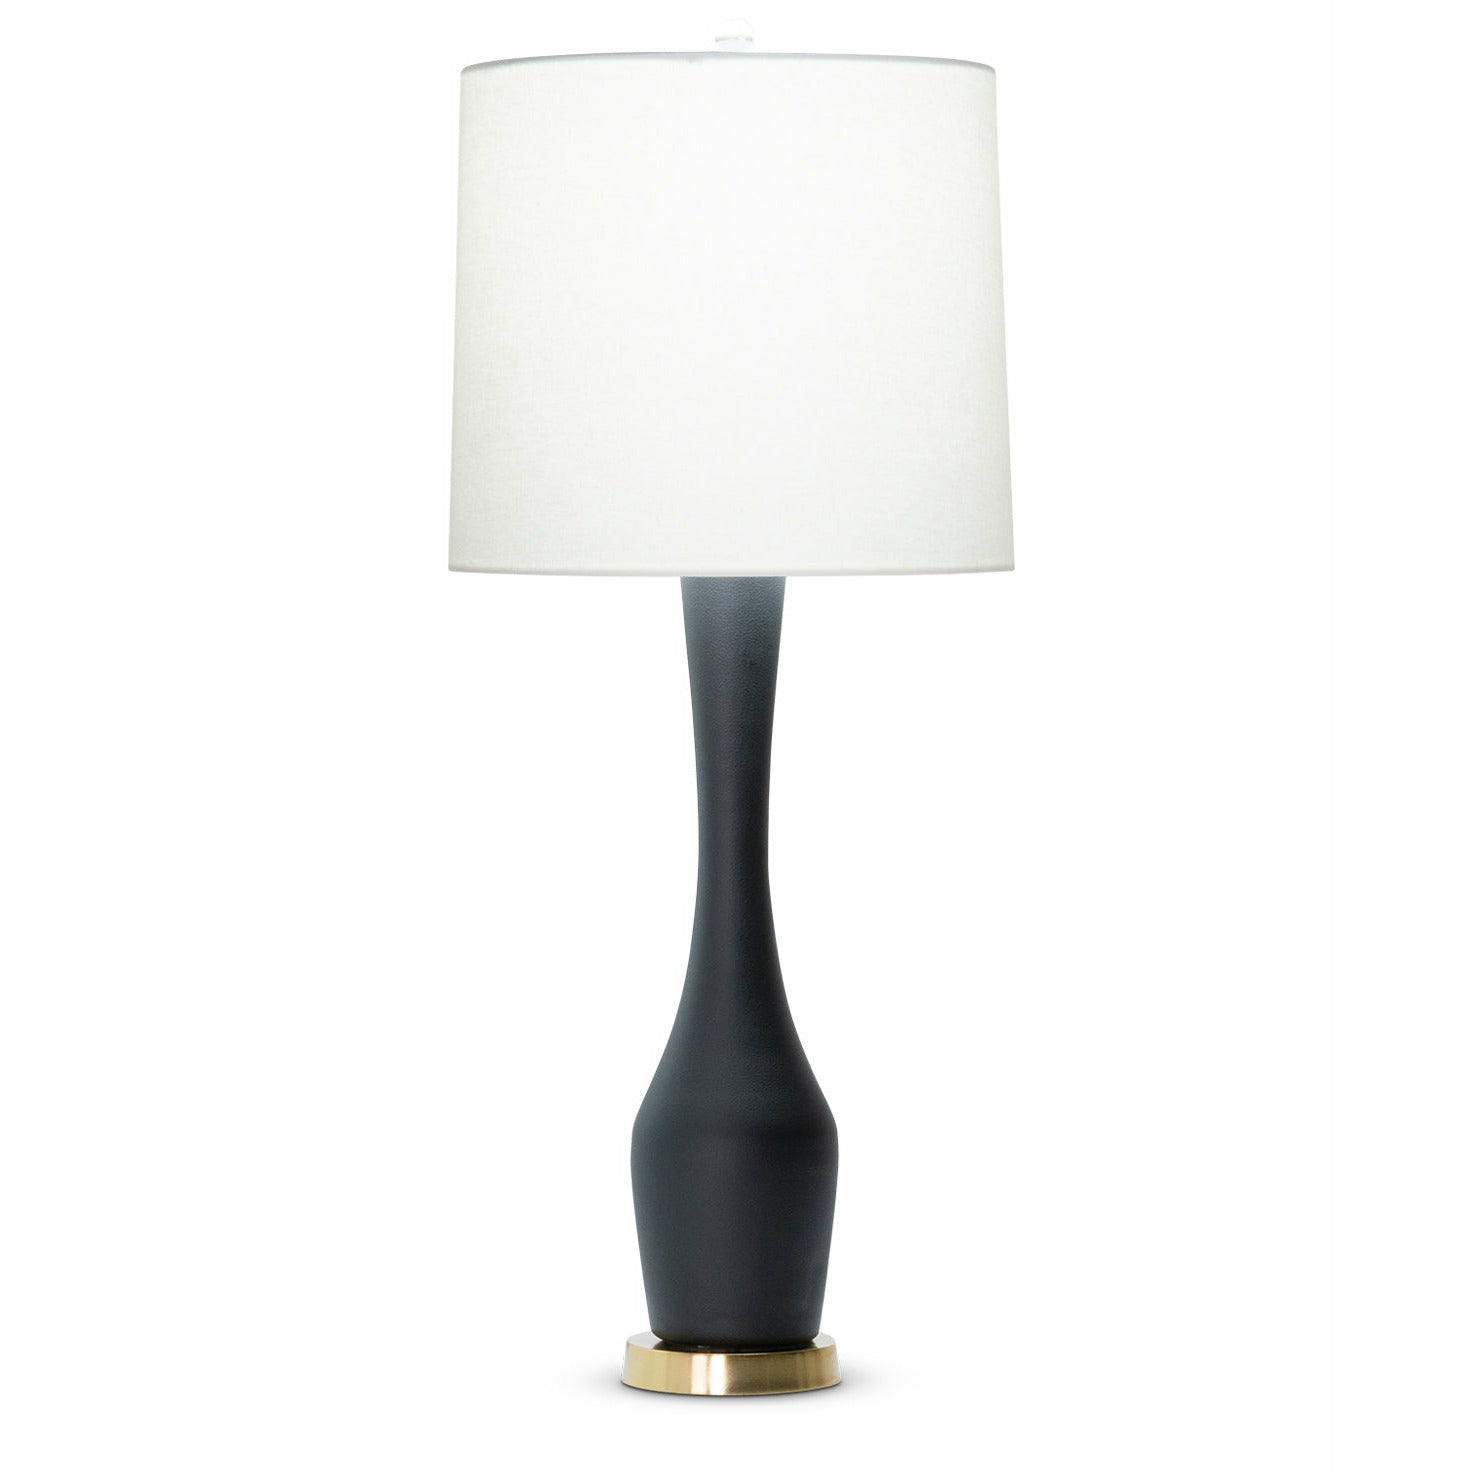 Durst Table Lamp